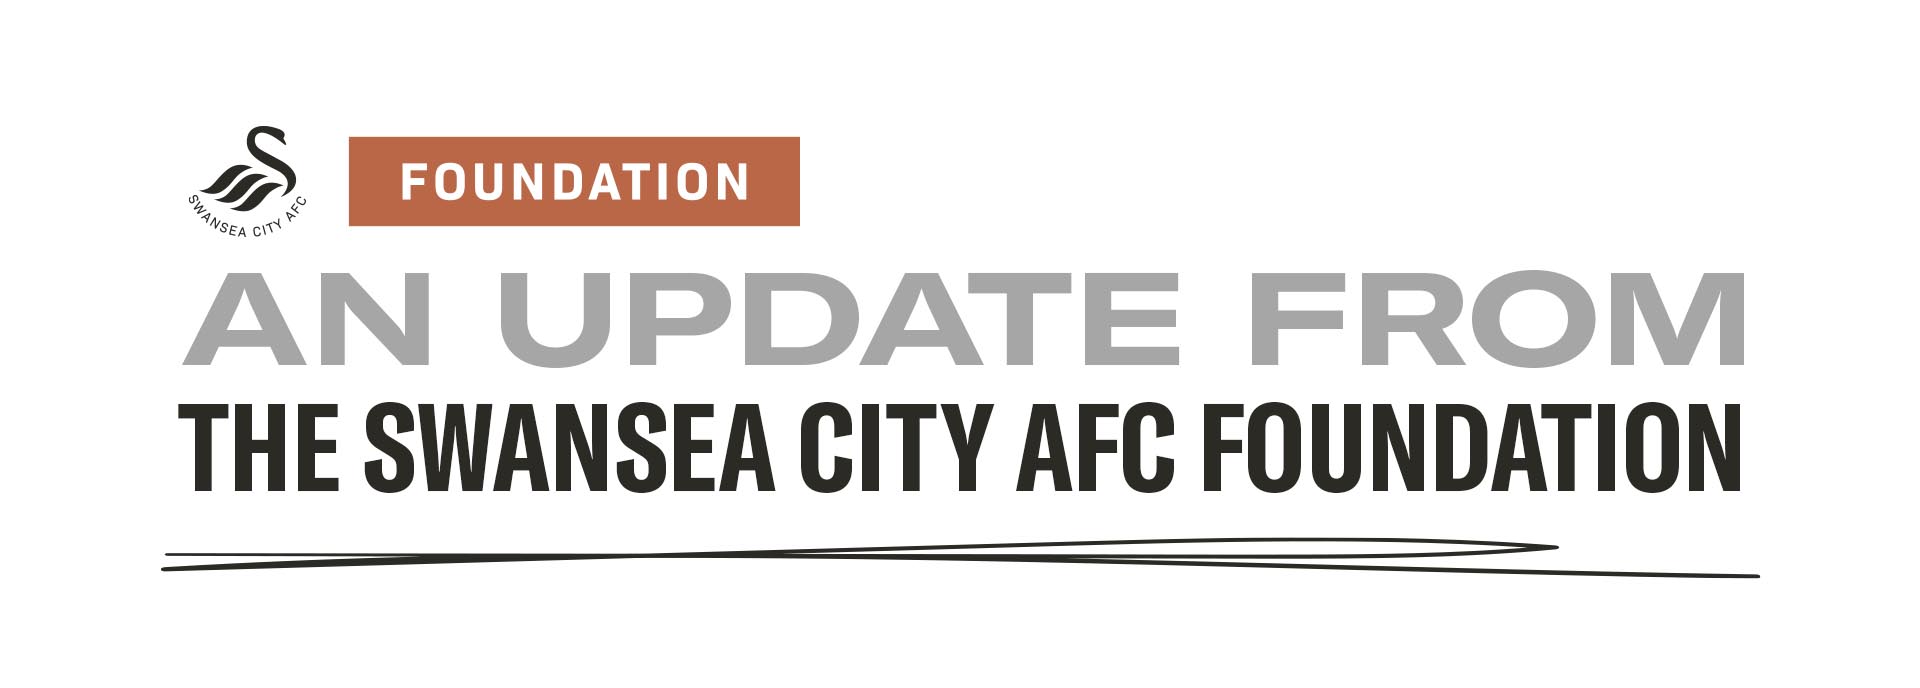 An Update from the Swansea City AFC Foundation